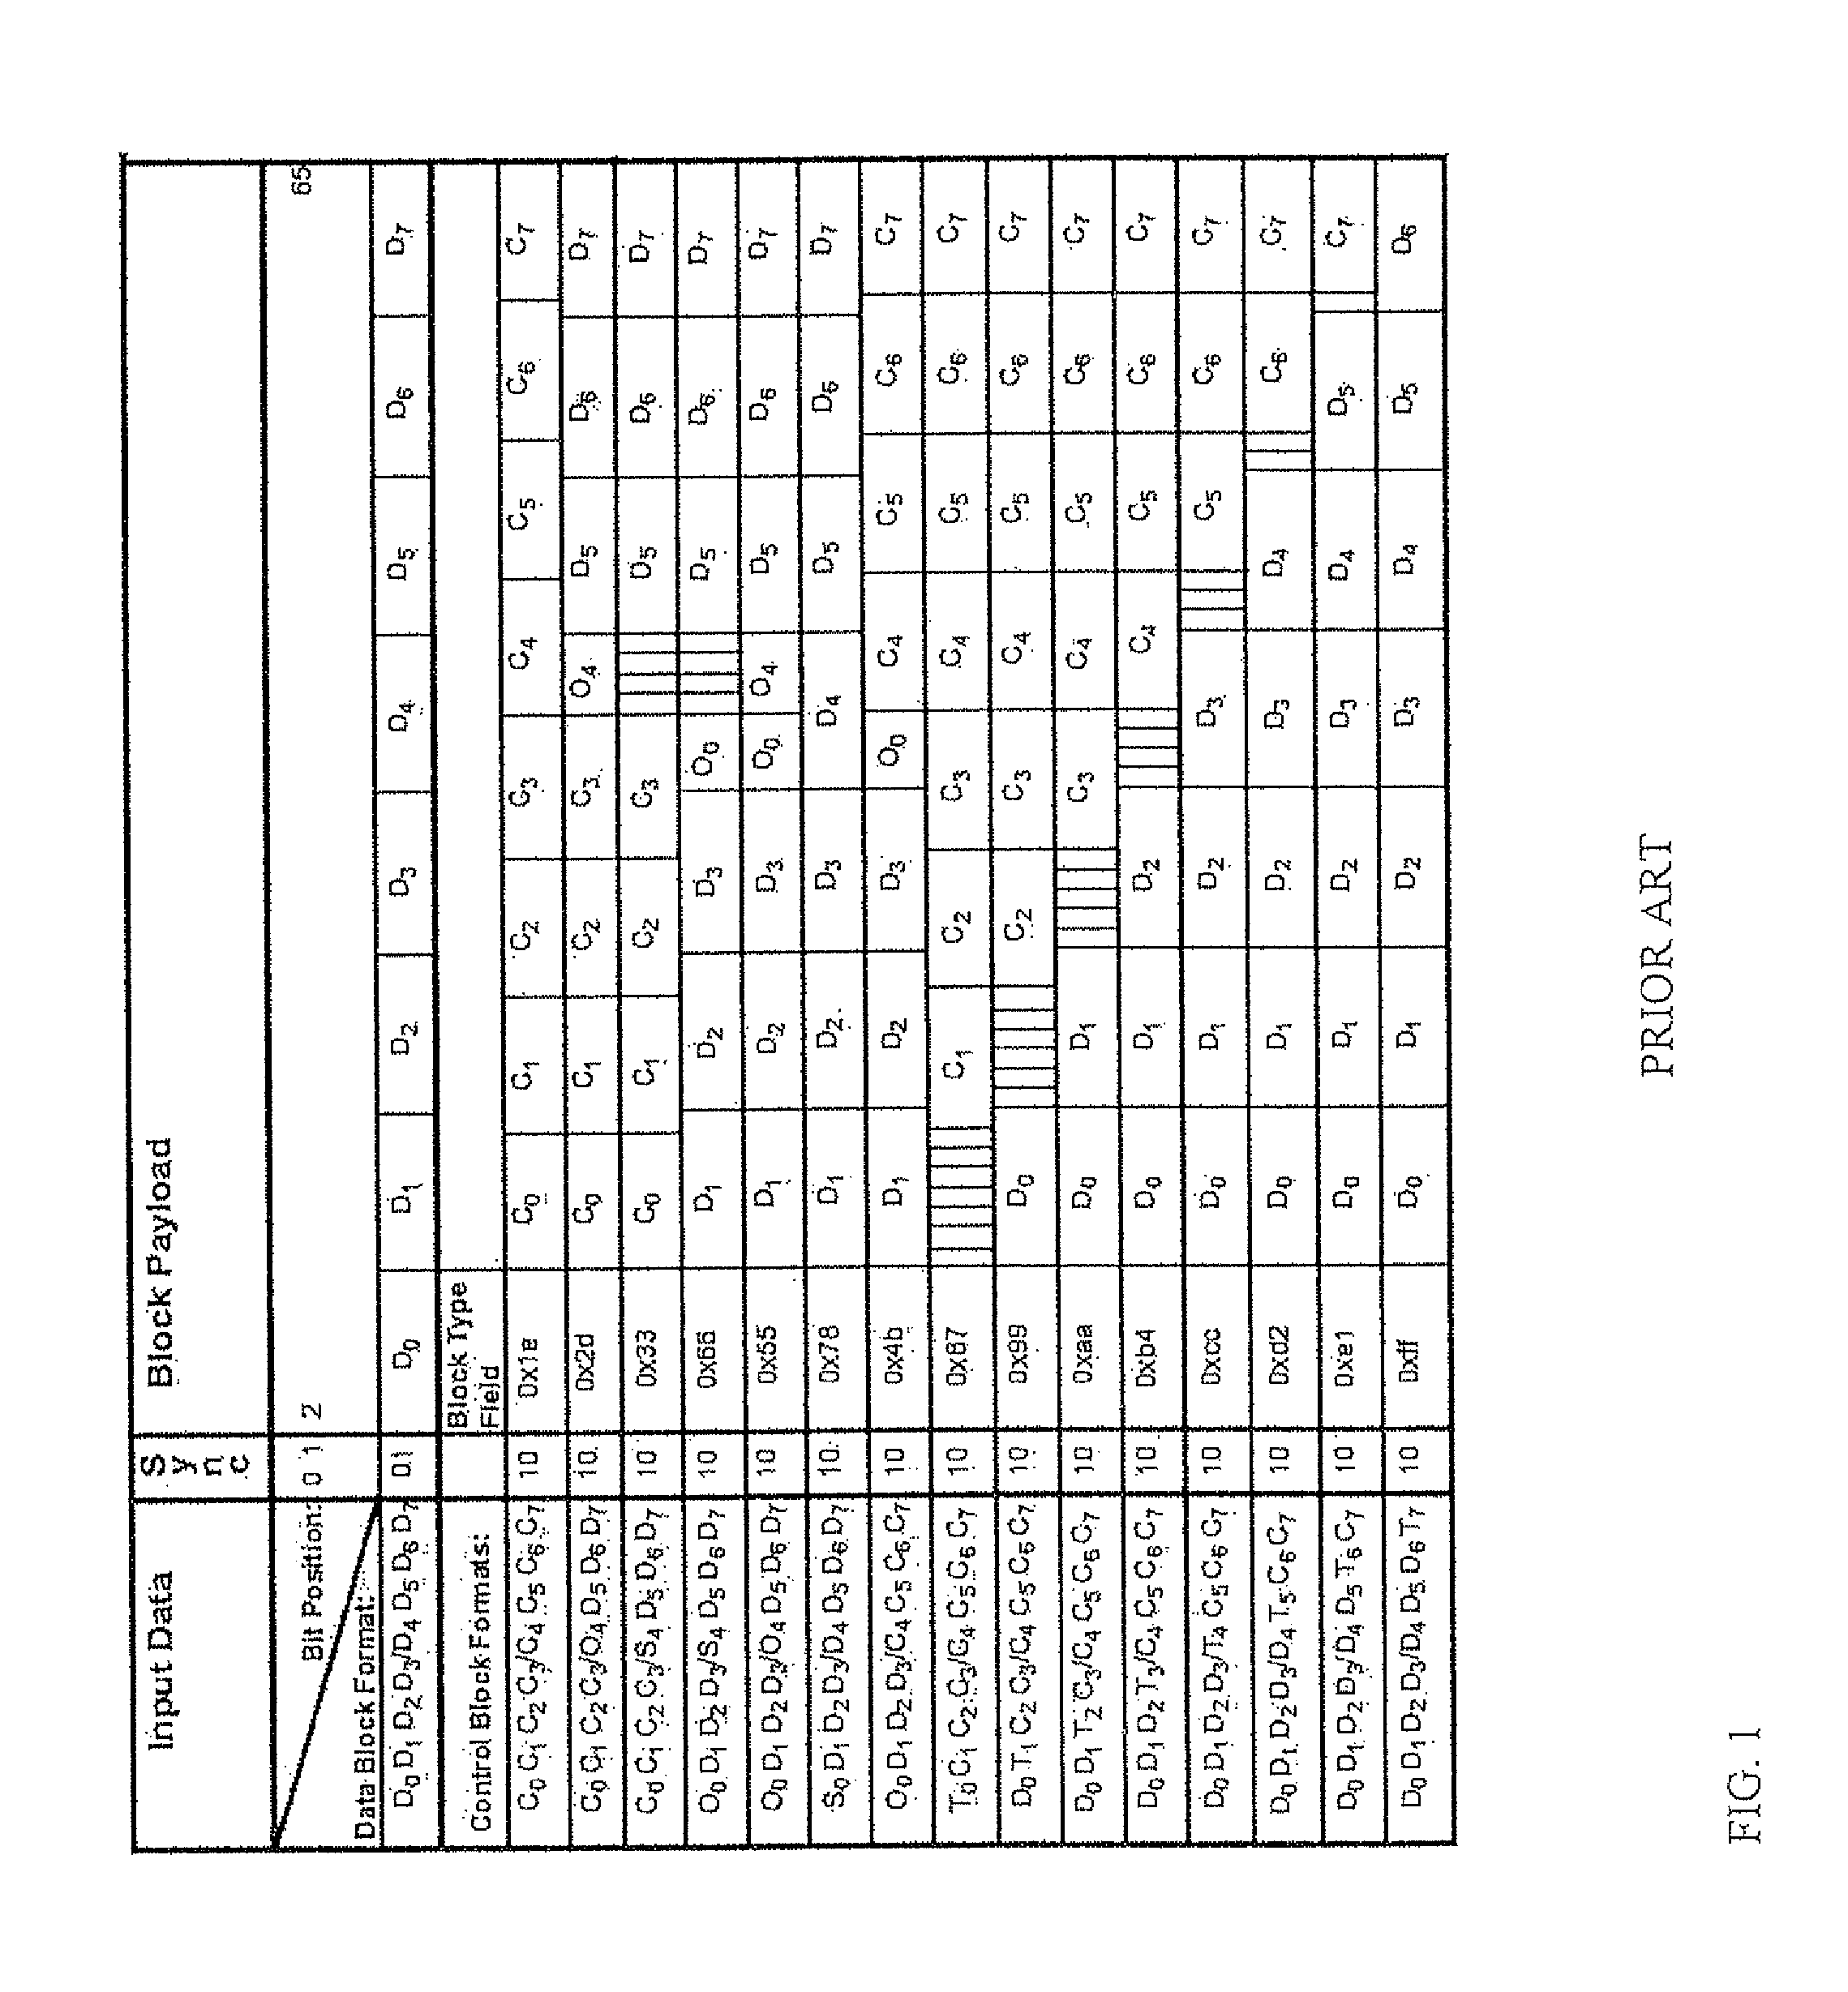 End-of-burst detection for upstream channel of a point-to-multipoint link